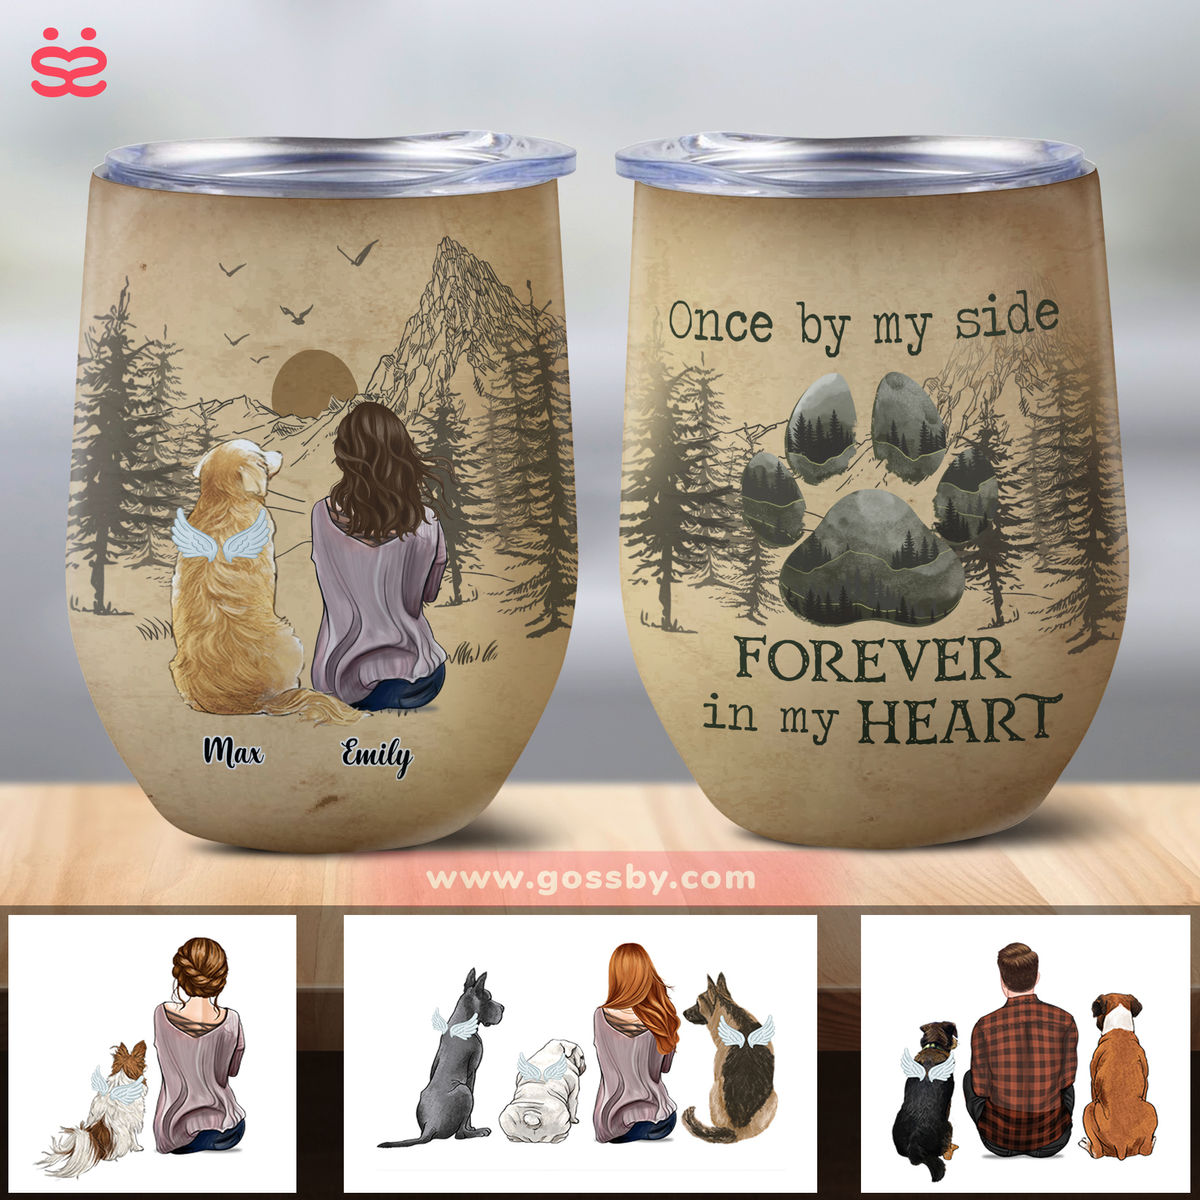 Sisters Forever Personalized Stainless Insulated Wine Cup